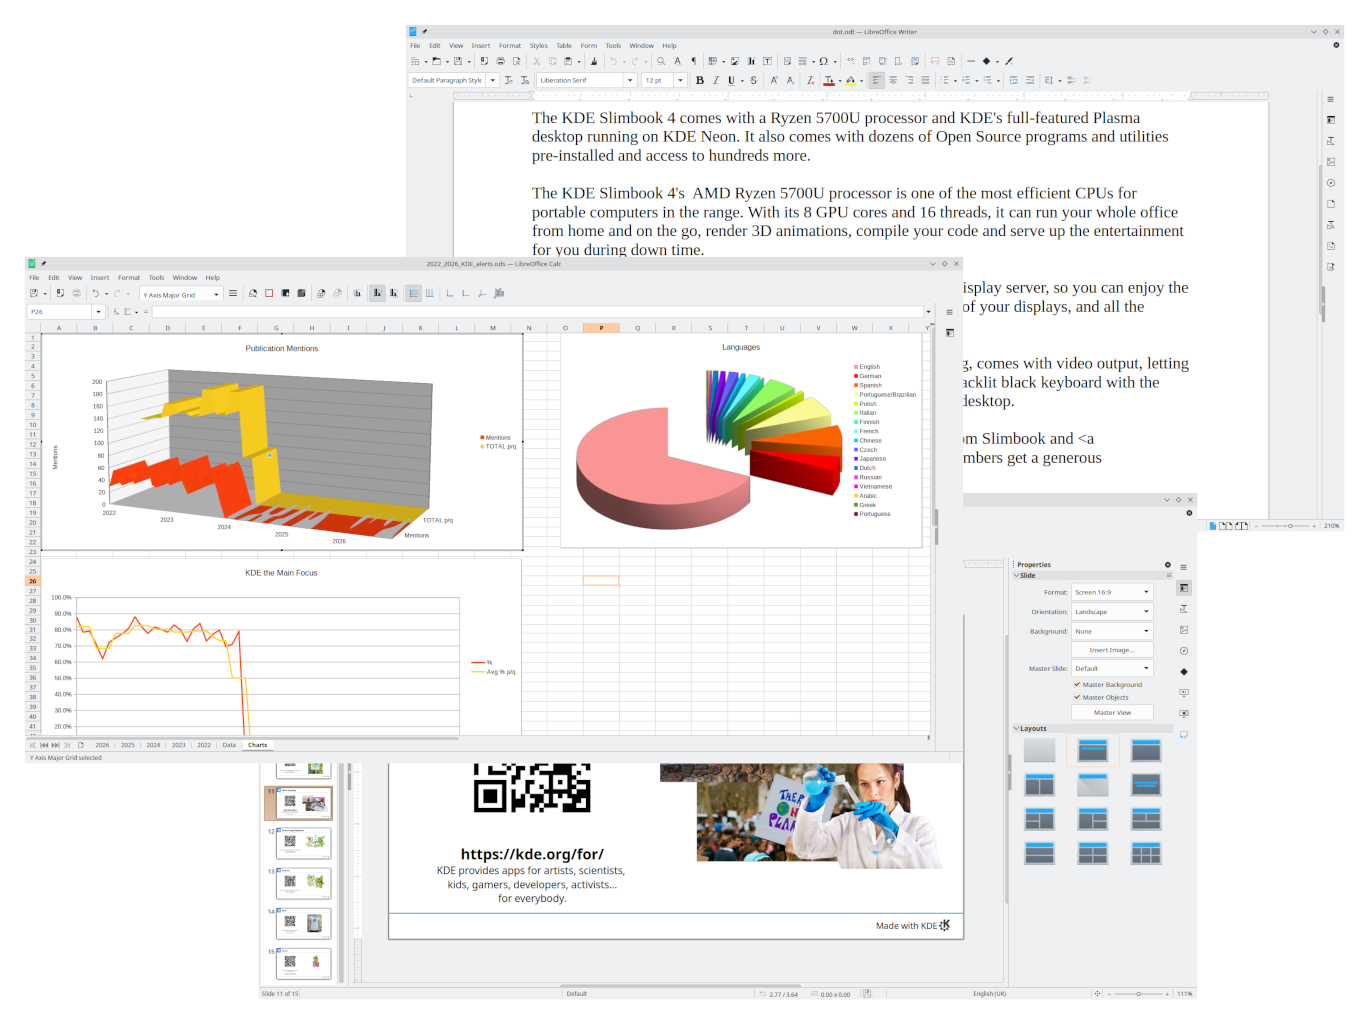 LibreOffice is the productivity app that provides you with a complete office suite with word processing, spreadsheets, presentations, graphs, databases and more.